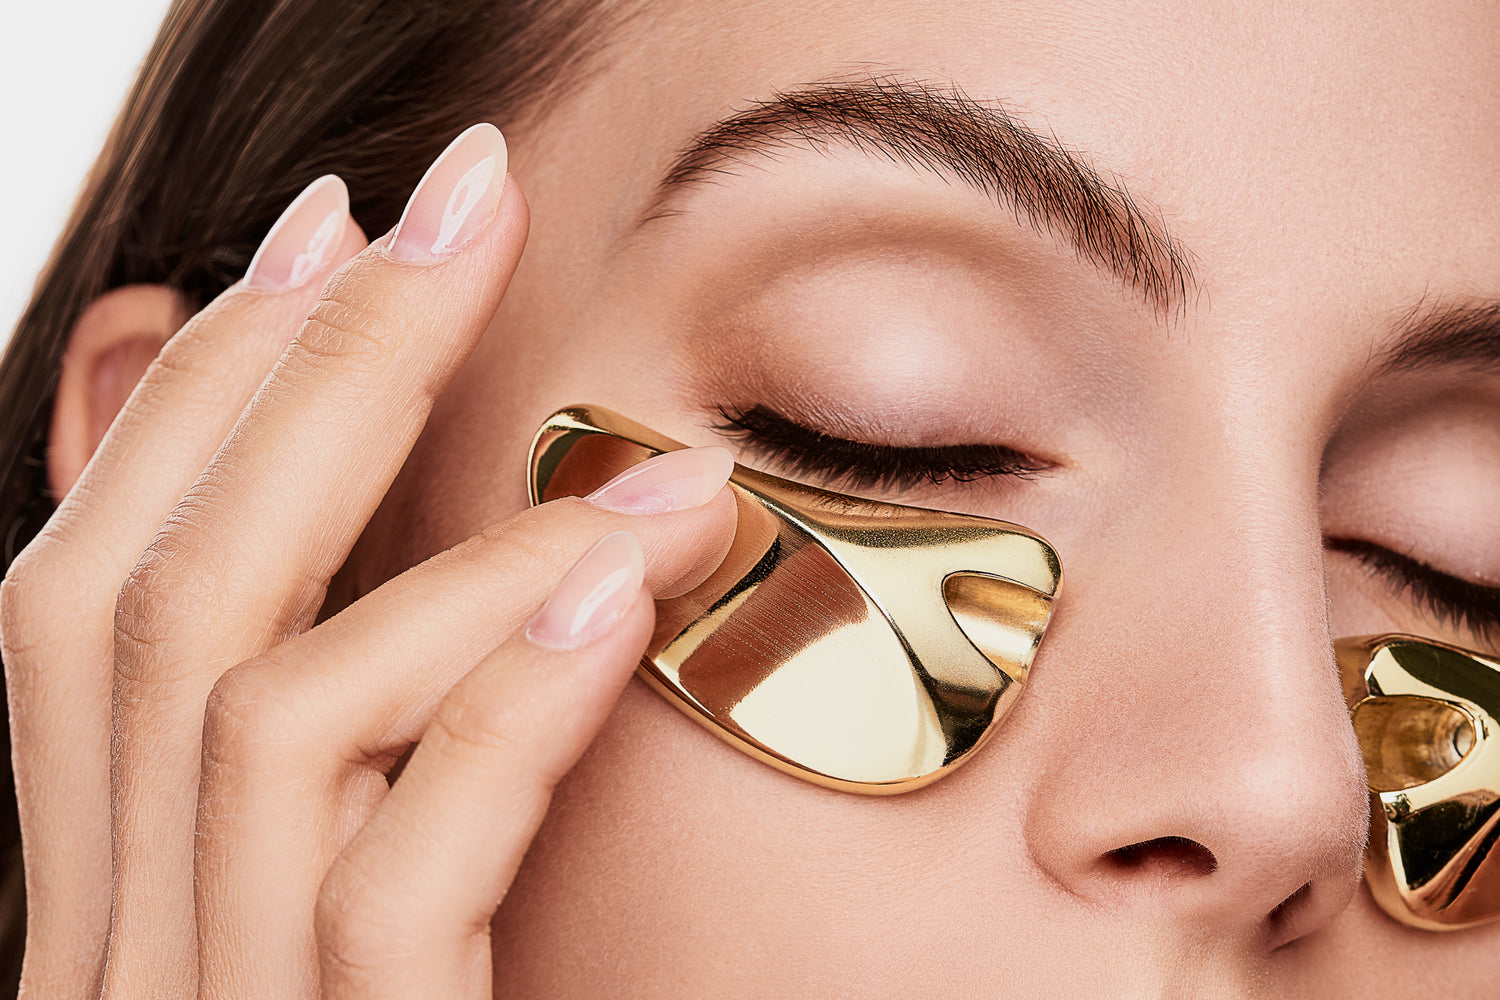 Aurox EMPORE uses the perfect temperature for your under-eye skin.